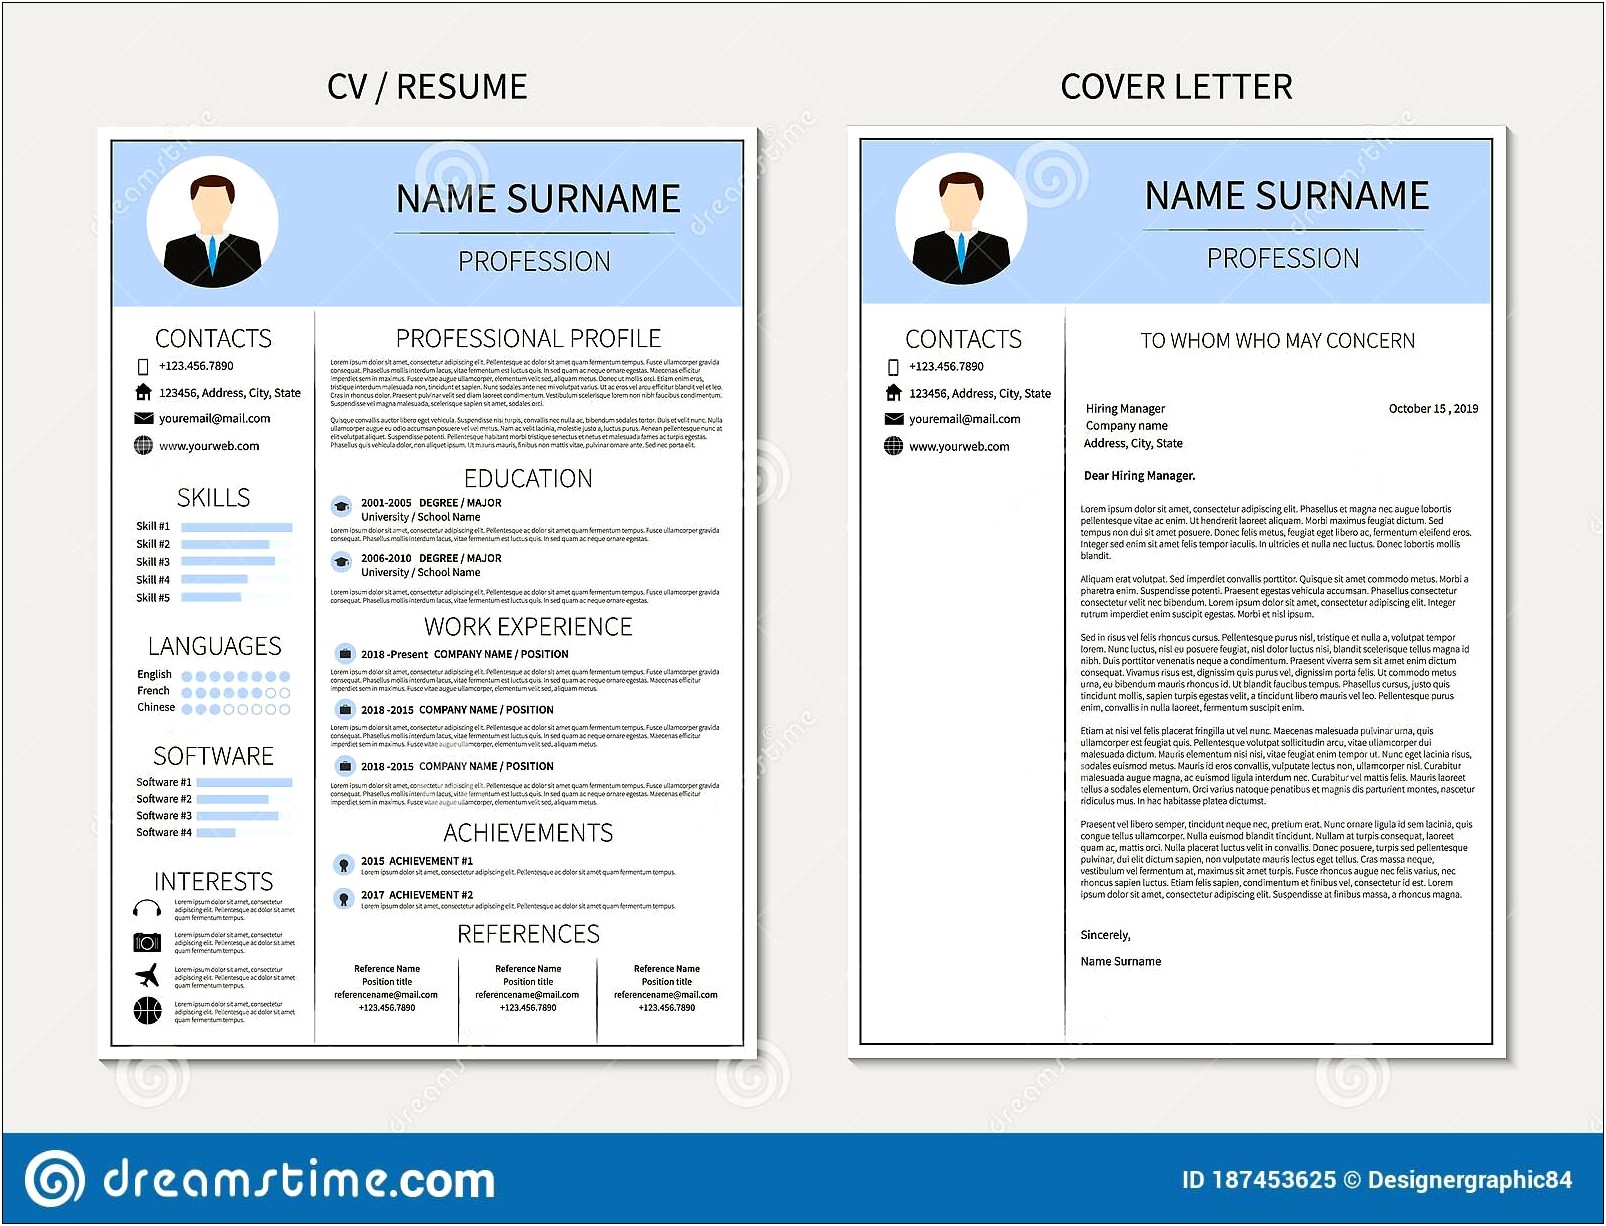 Resume With Multiple Degress Form The Same School